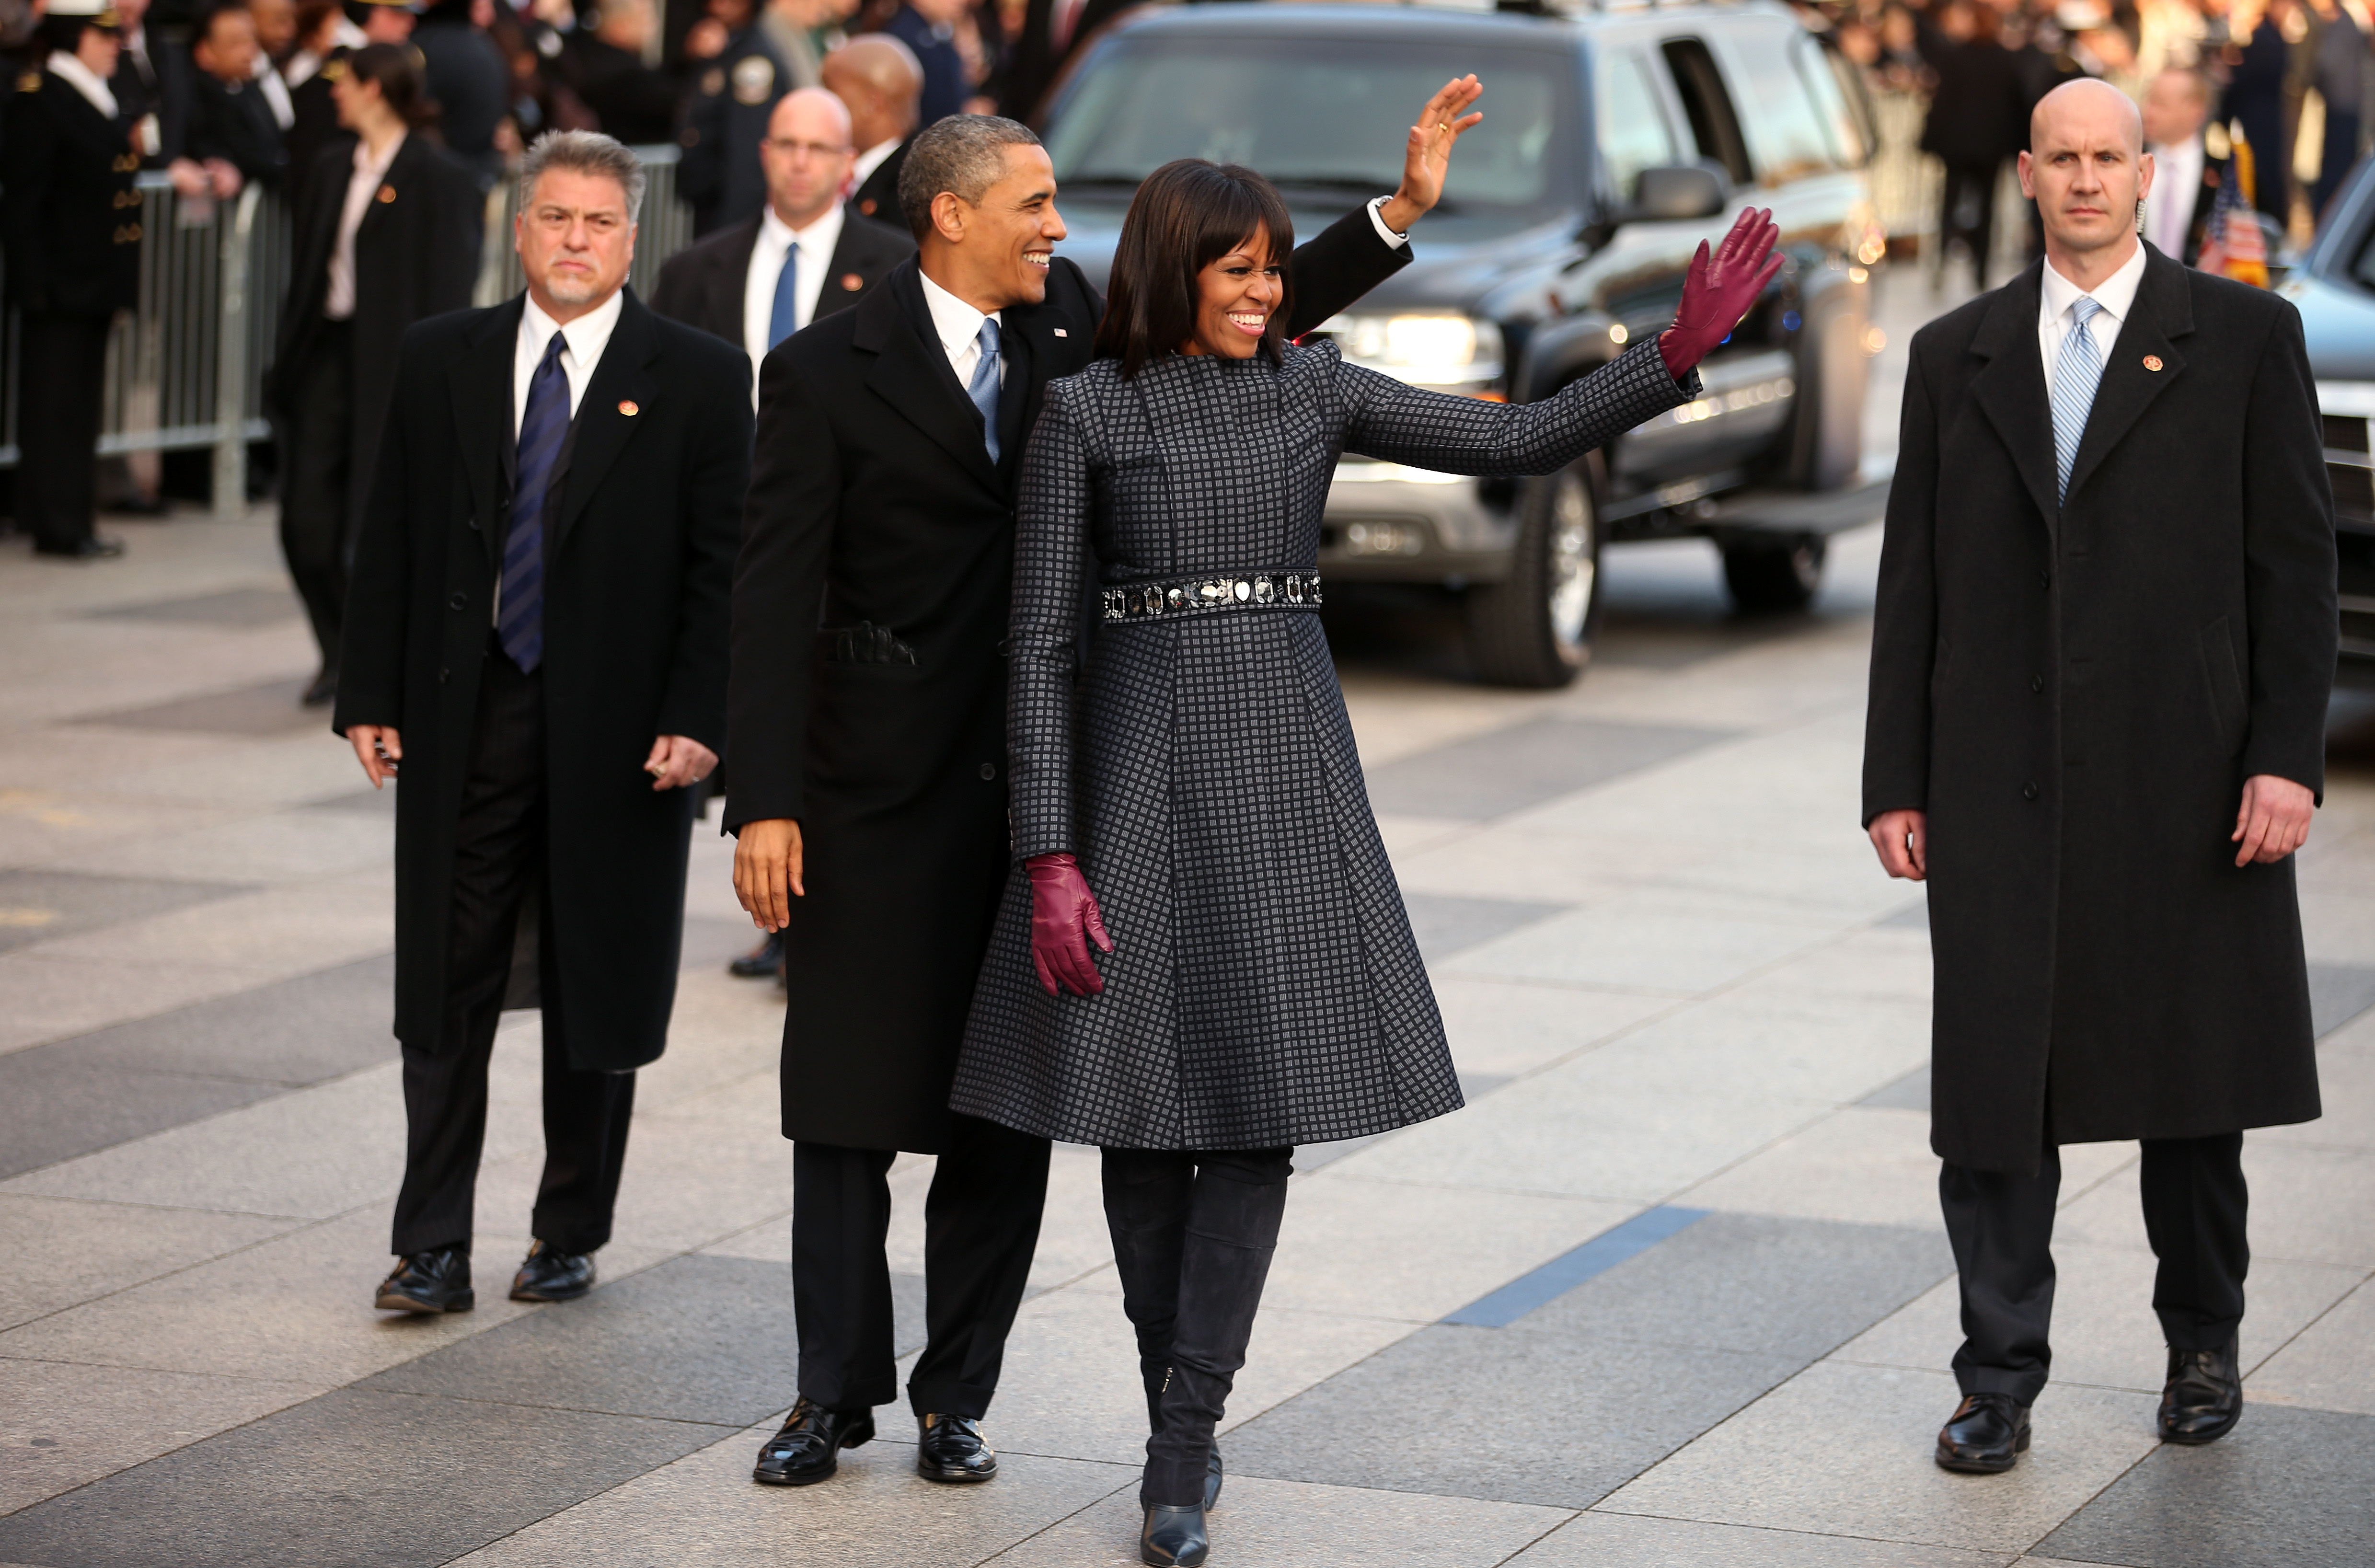 Inaugural Parade Held After Swearing In Ceremony